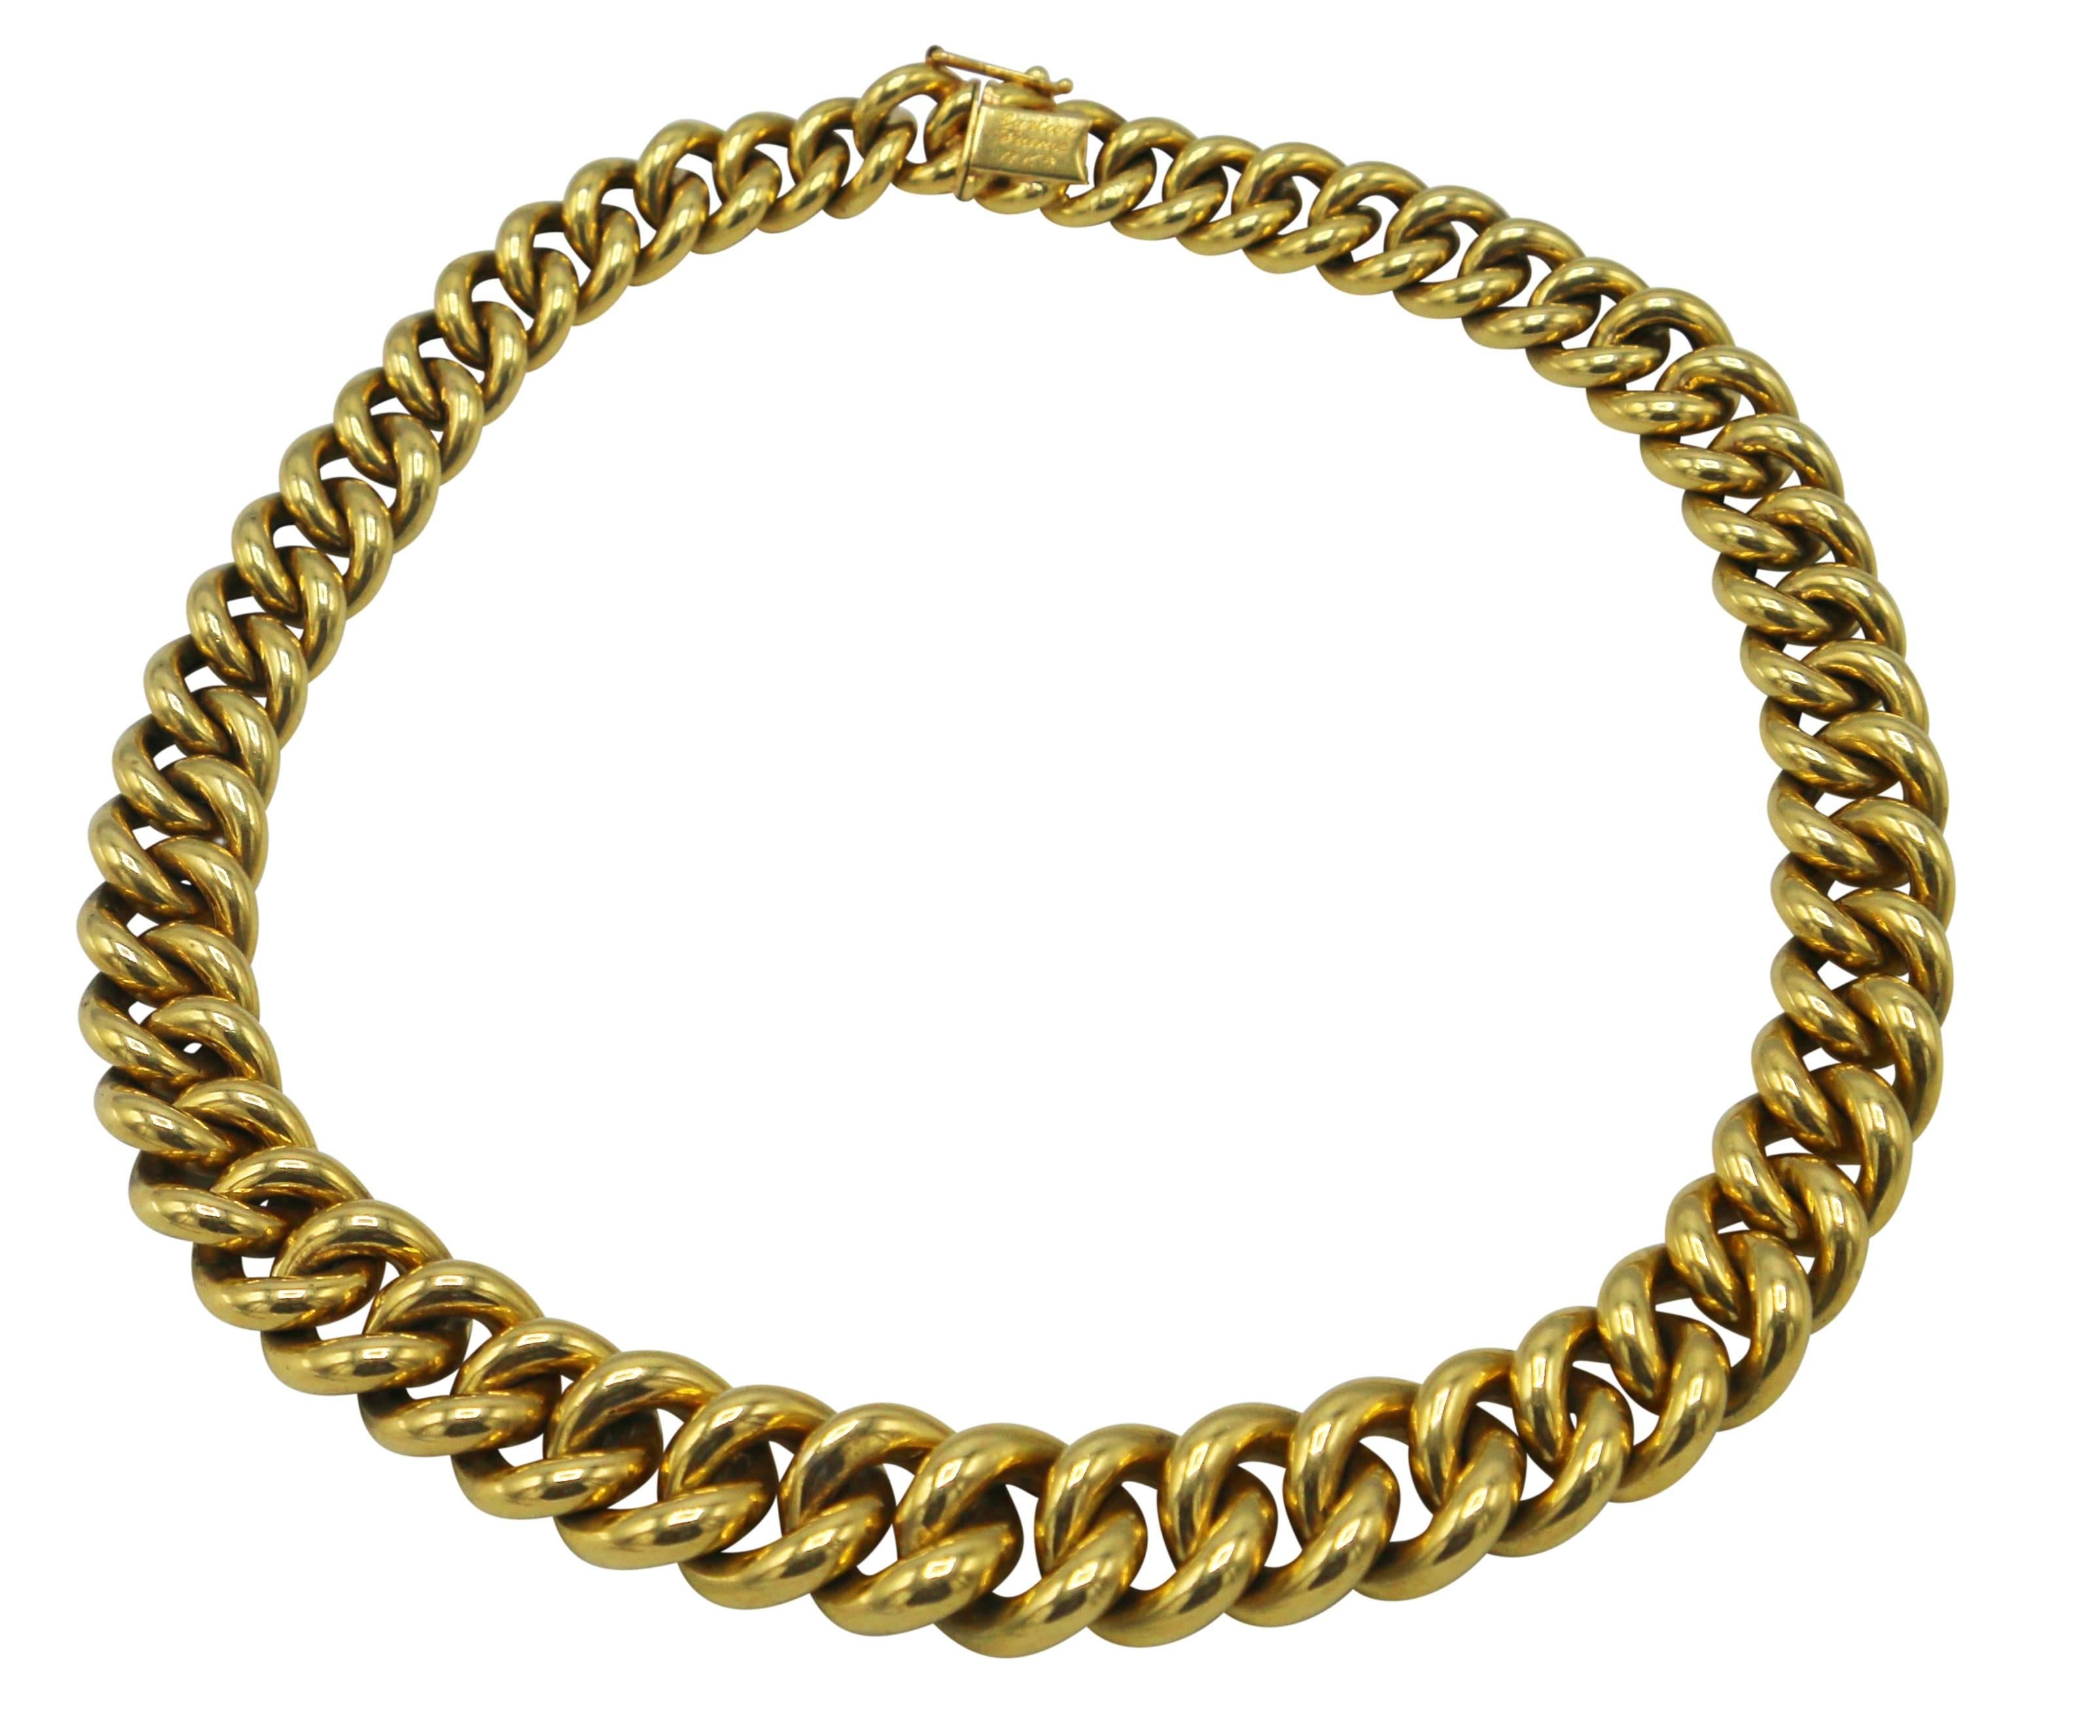 Classic 18 karat yellow gold link necklace by Cartier, France, of slightly tapered design composed of a series of polished gold links, gross weight 83.0 grams, length 14 inches, width 1/2 inch, signed Cartier, France, 18Kts. This necklace sits